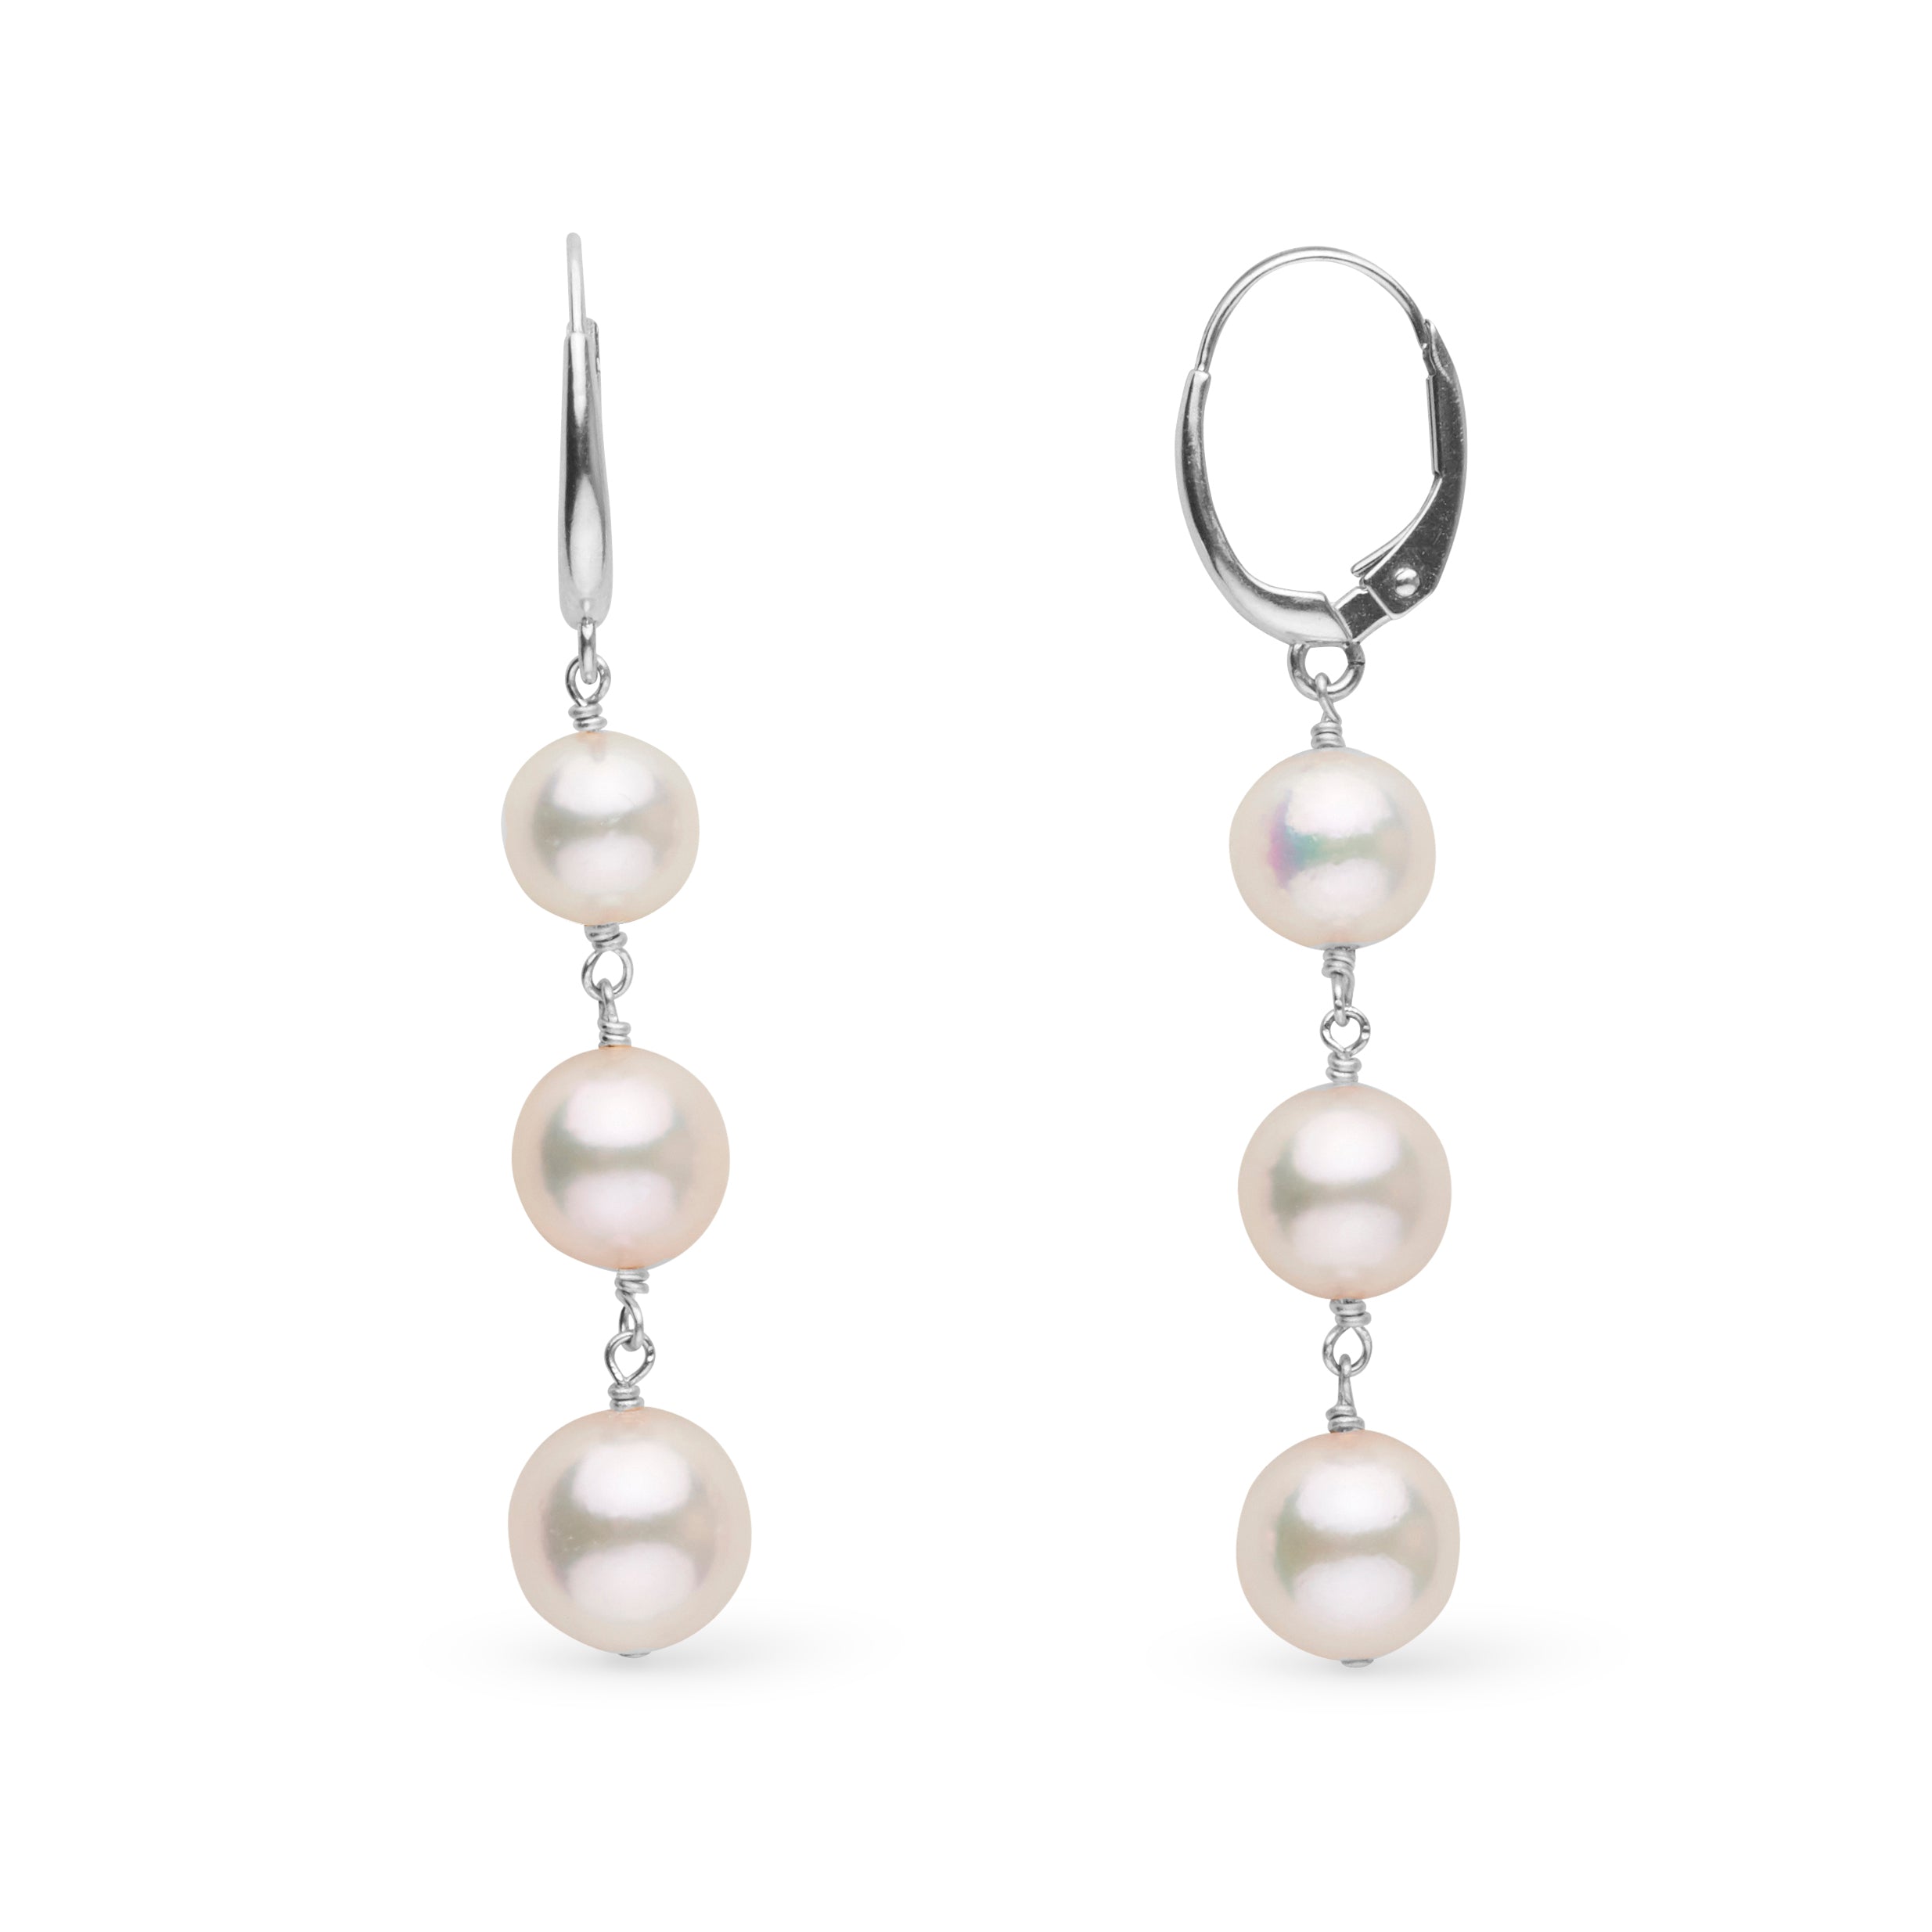 6.5-9.0 mm Triple Akoya Pearl Muse Collection Earrings White Gold